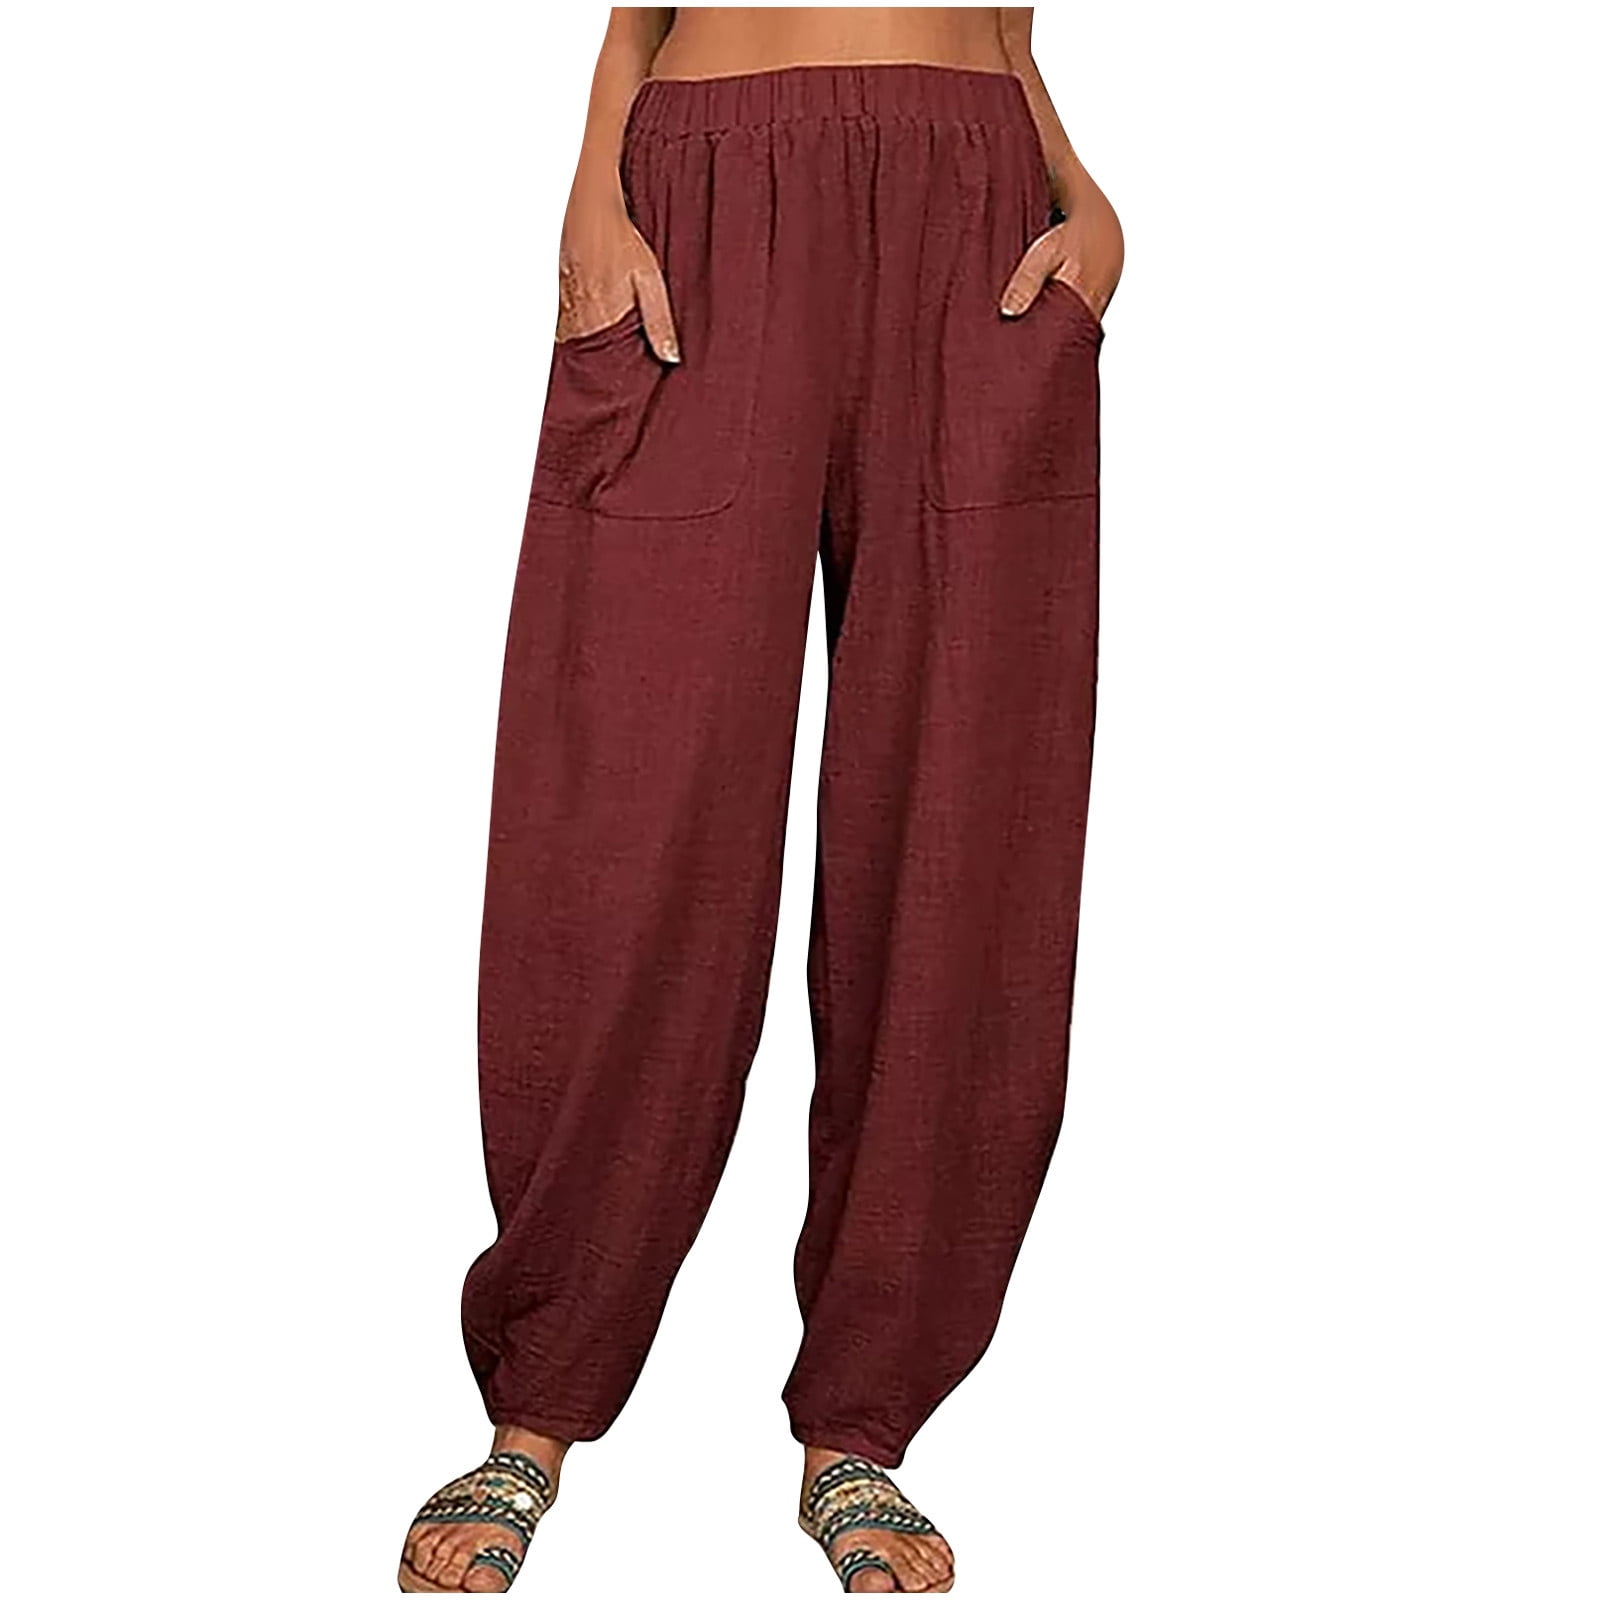 Clearance Loose Sweatpants Women's Fashion Casual Solid Elastic Waist  Trousers Long Straight Pants Red XXL 